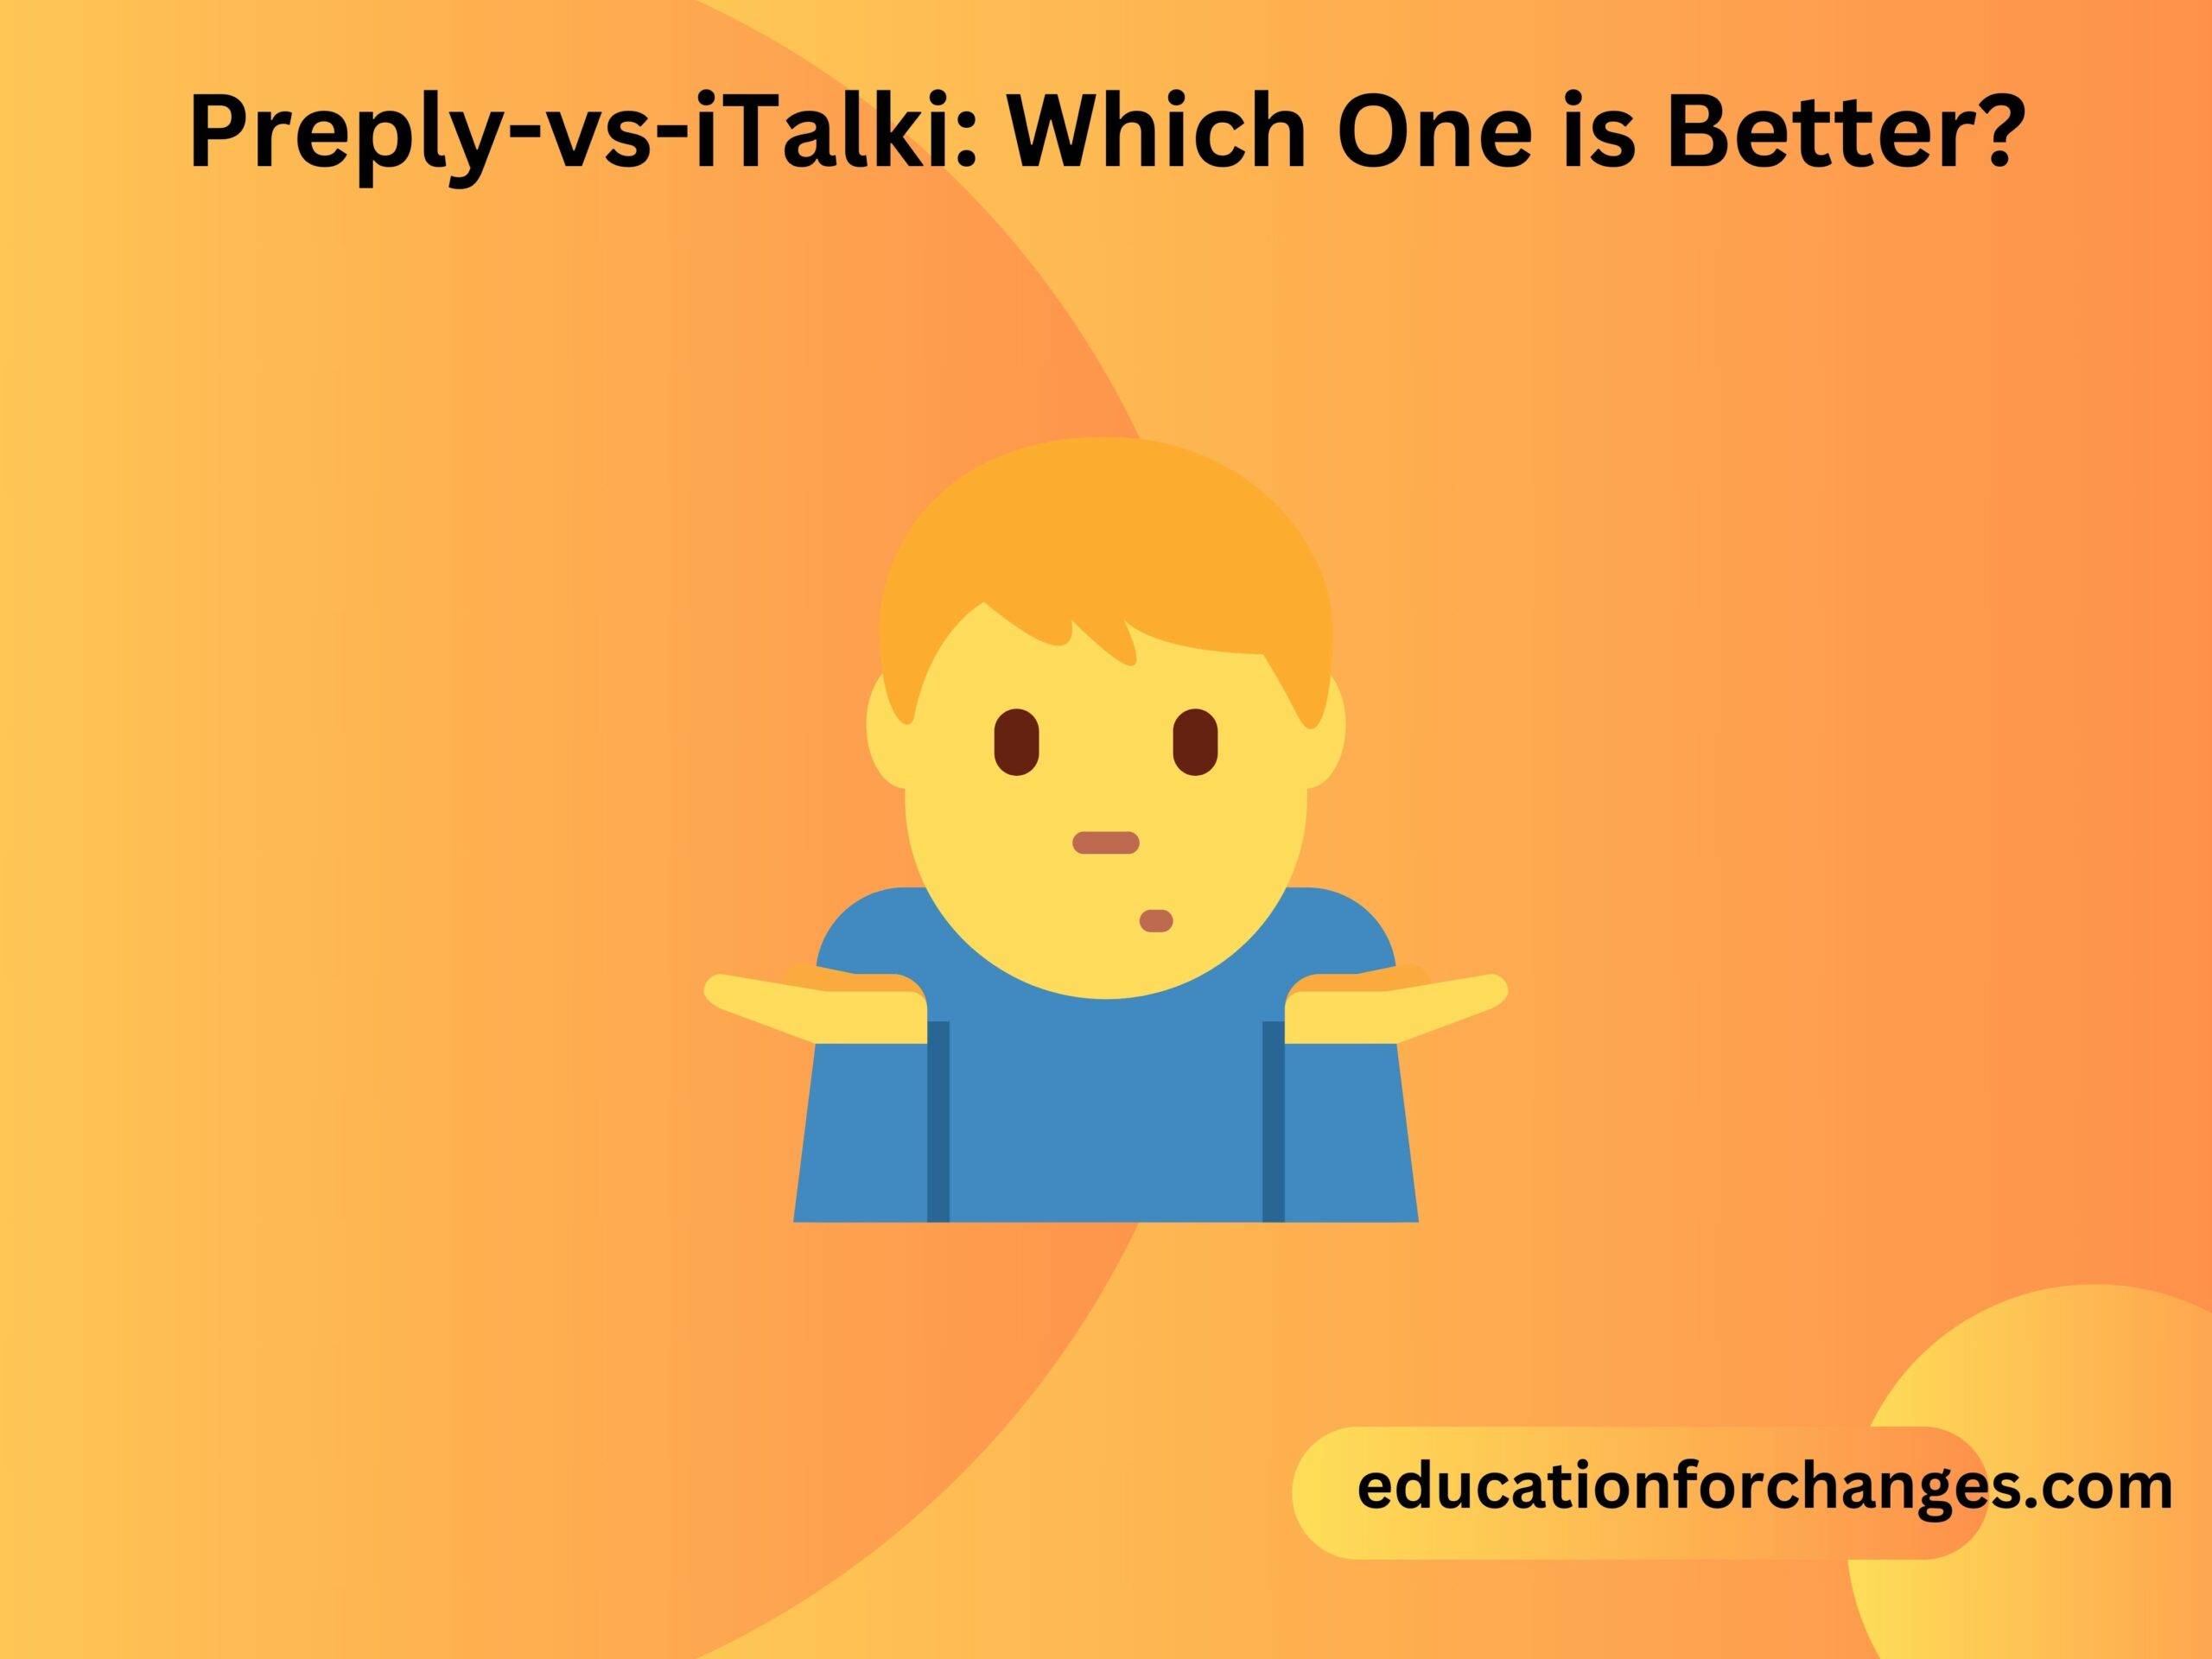 Preply-vs-iTalki: Which One is Better?